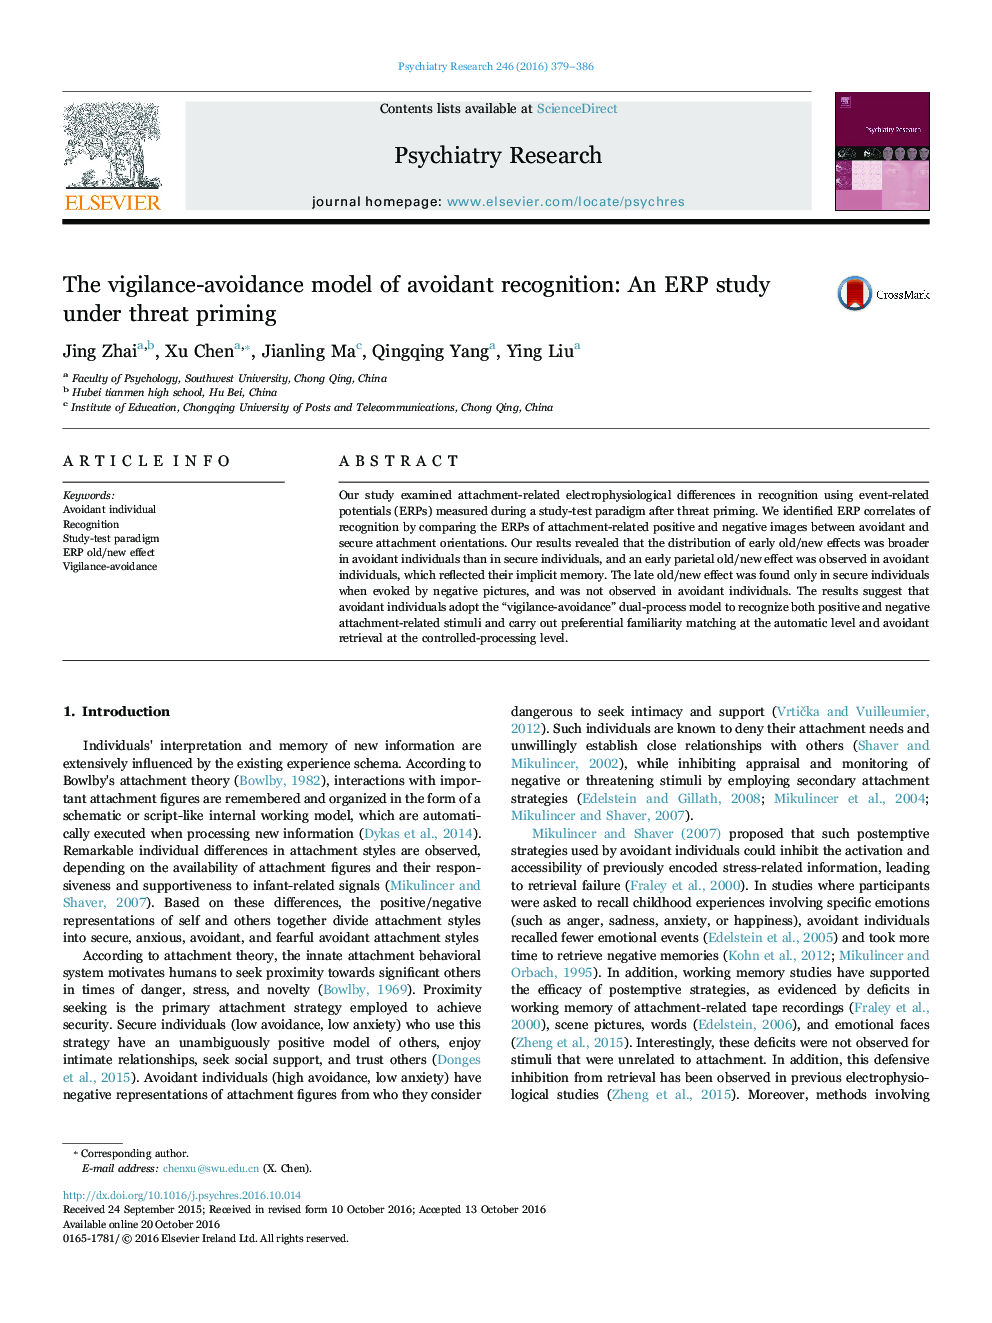 The vigilance-avoidance model of avoidant recognition: An ERP study under threat priming